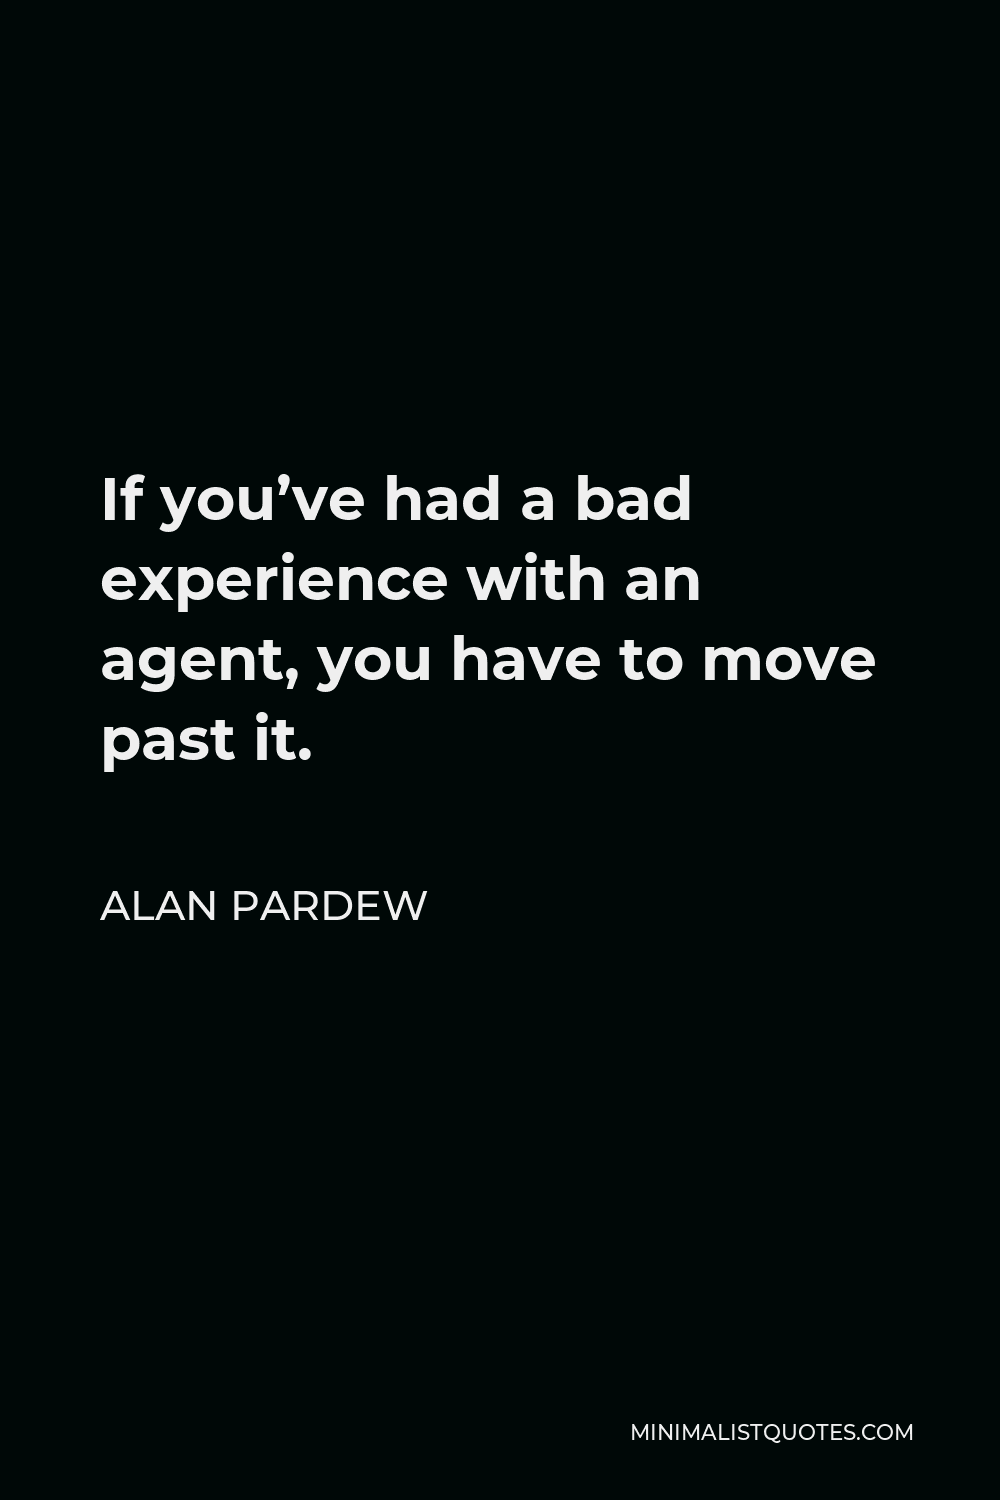 Alan Pardew Quote - If you’ve had a bad experience with an agent, you have to move past it.